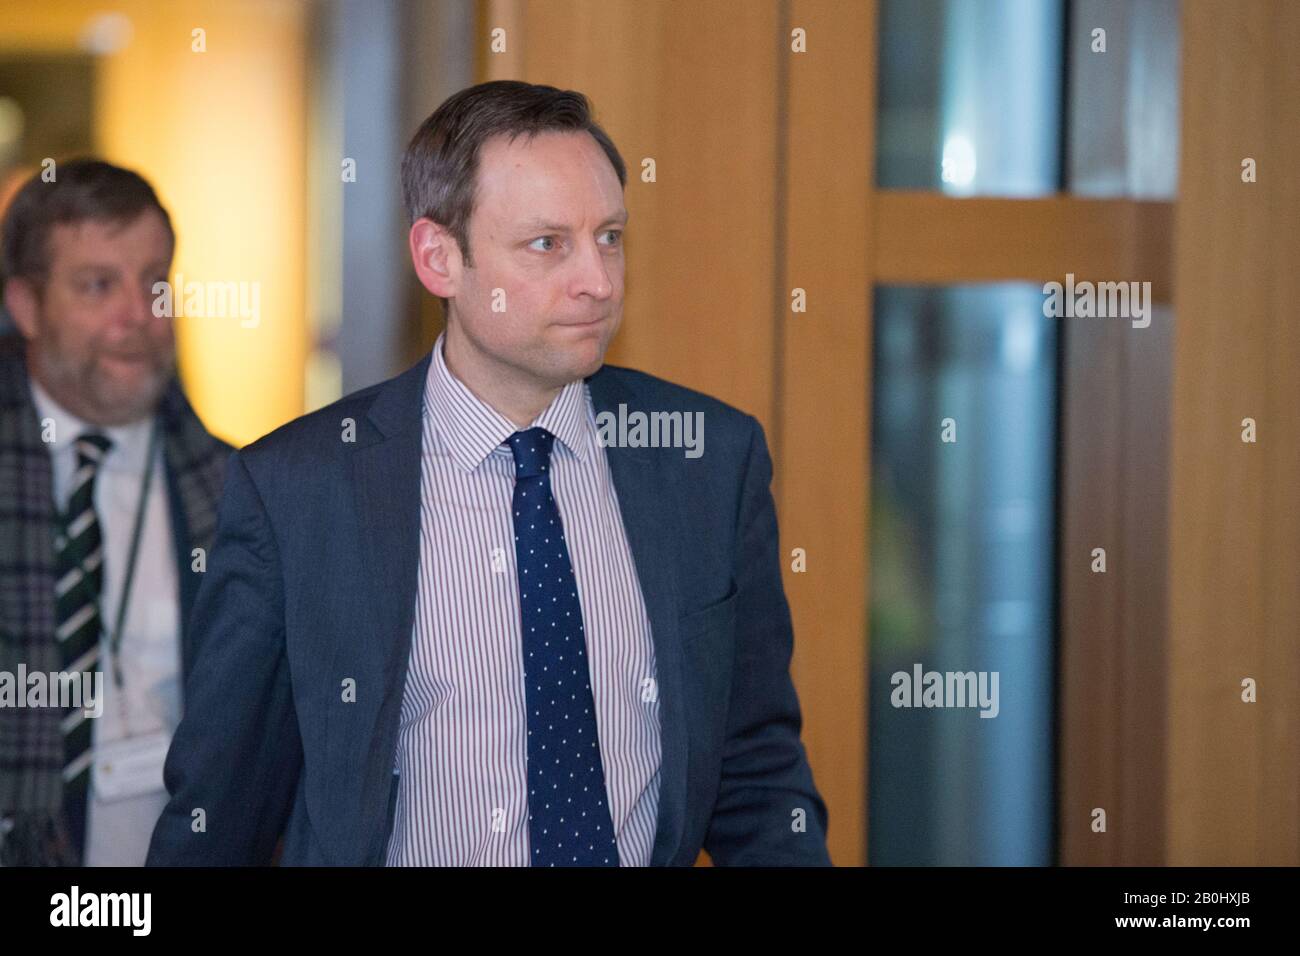 Edinburgh, UK. 20th Feb, 2020. Pictured: Liam Kerr MSP - Deputy Leader, Shadow Cabinet Secretary for Justice, seen after decision time at the Scottish Parliament in Holyrood, Edinburgh. Credit: Colin Fisher/Alamy Live News Stock Photo